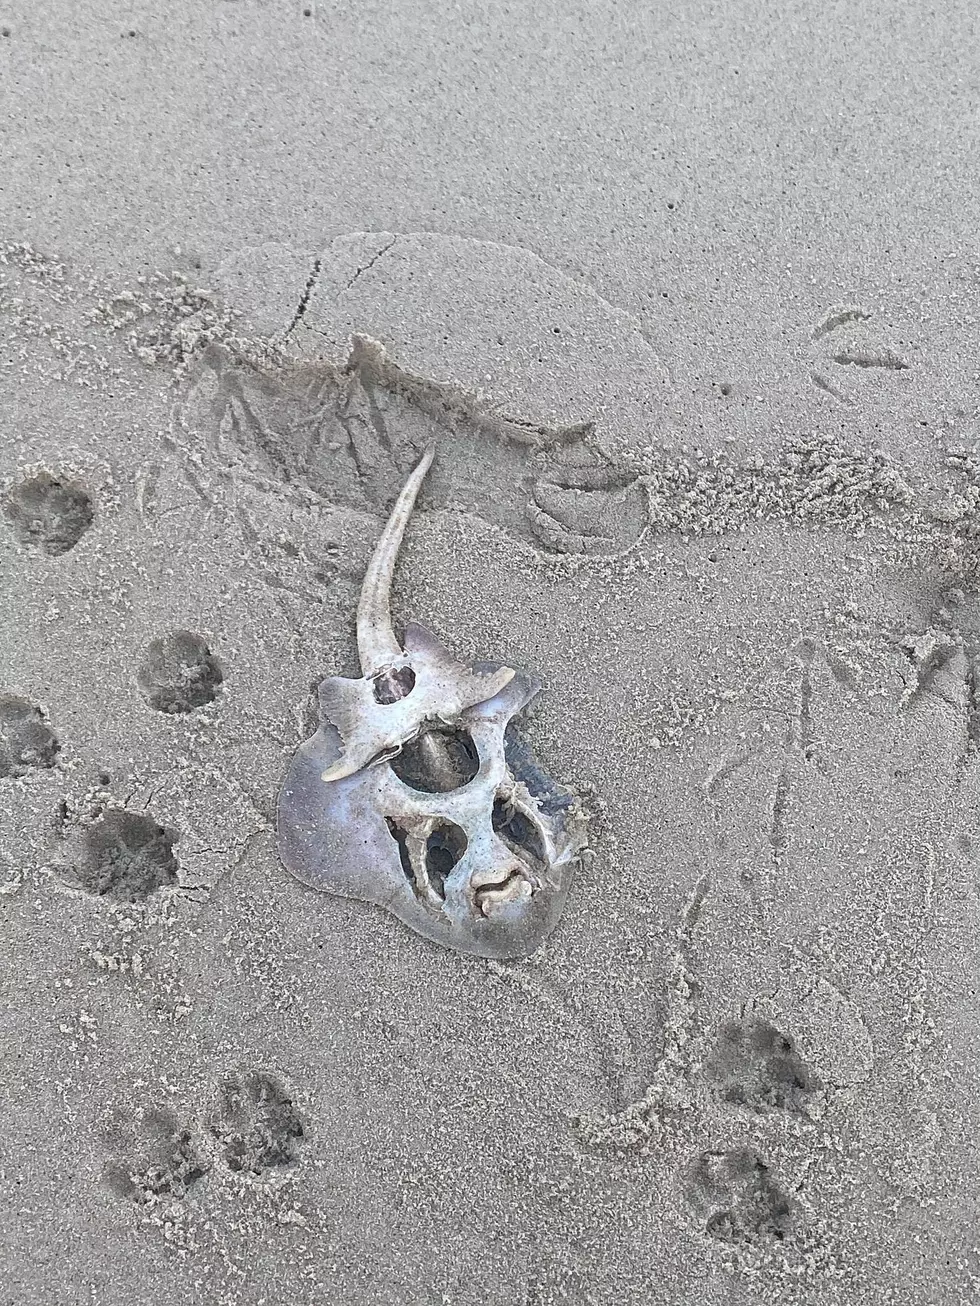 Attention Sea Lovers: What In The Crap Is This Creature Found At The Jersey Shore, NJ?